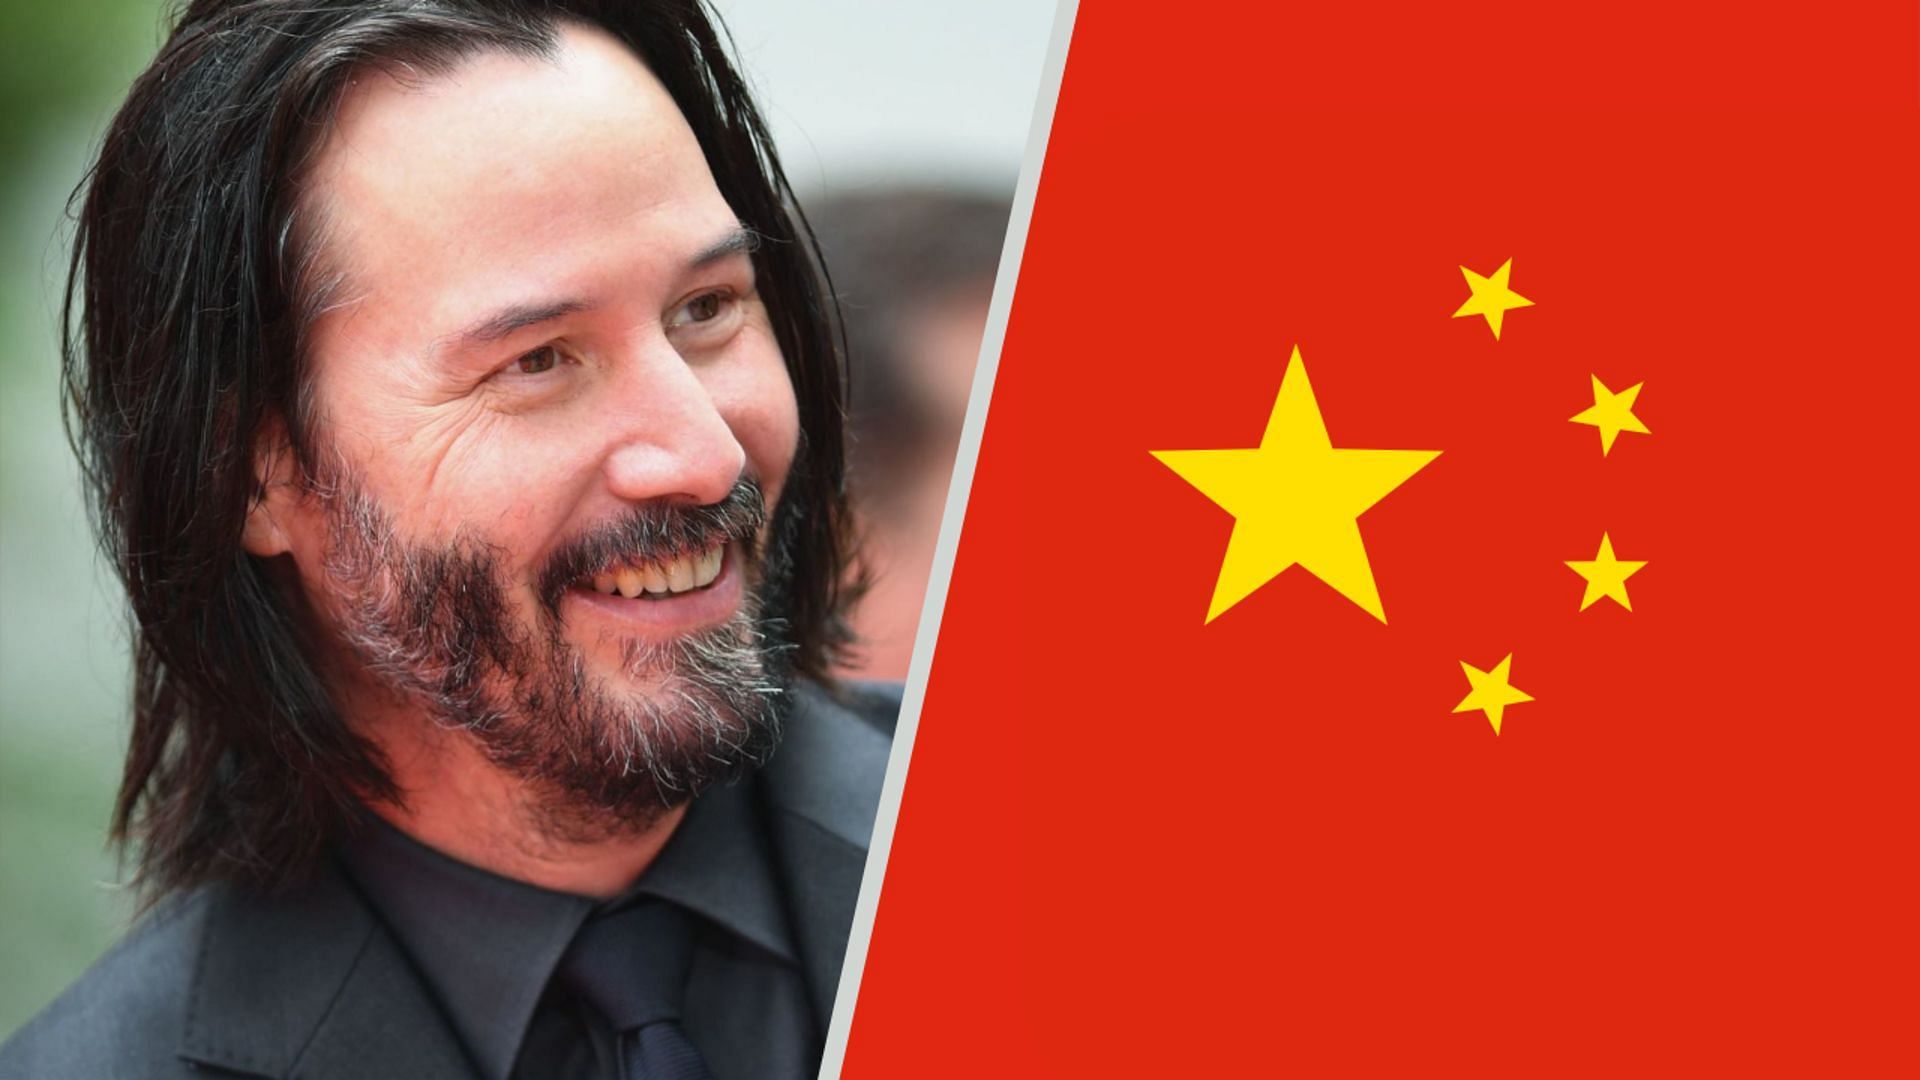 Keanu Reeves banned by China over supporting Tibet (Image via Sportskeeda)